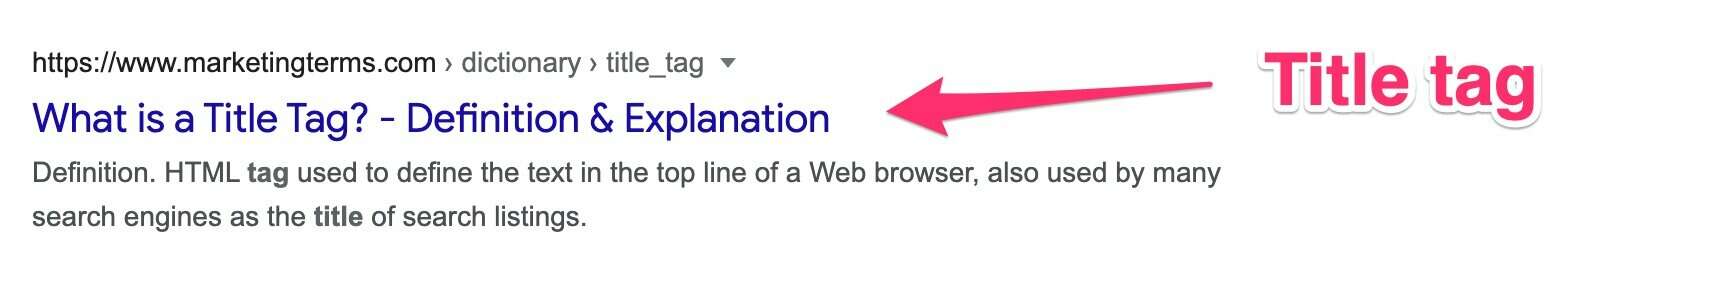 example of a title tag as displayed in a SERP snippet